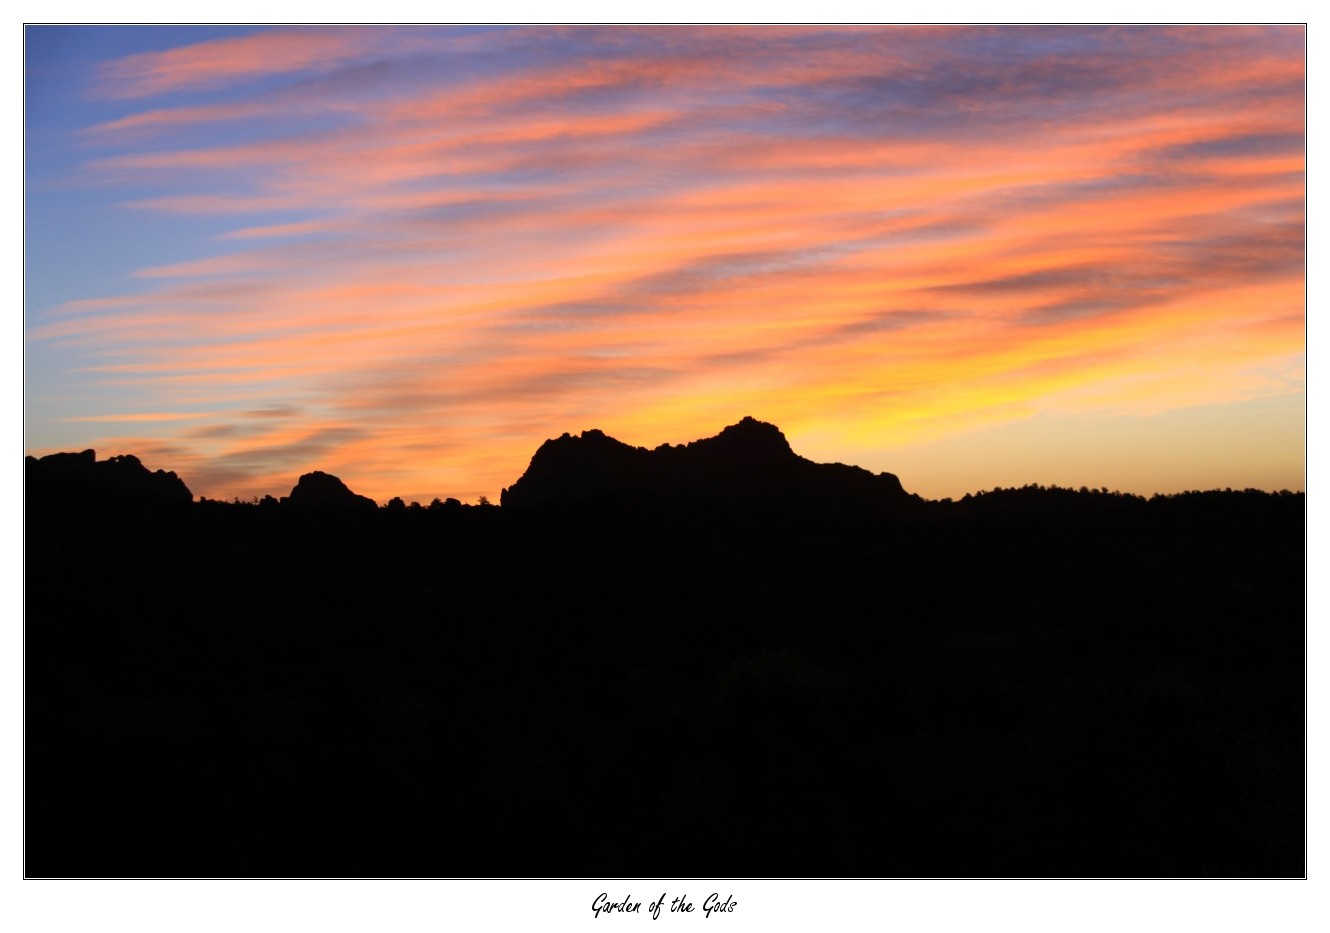 Garden of the Gods at dawn